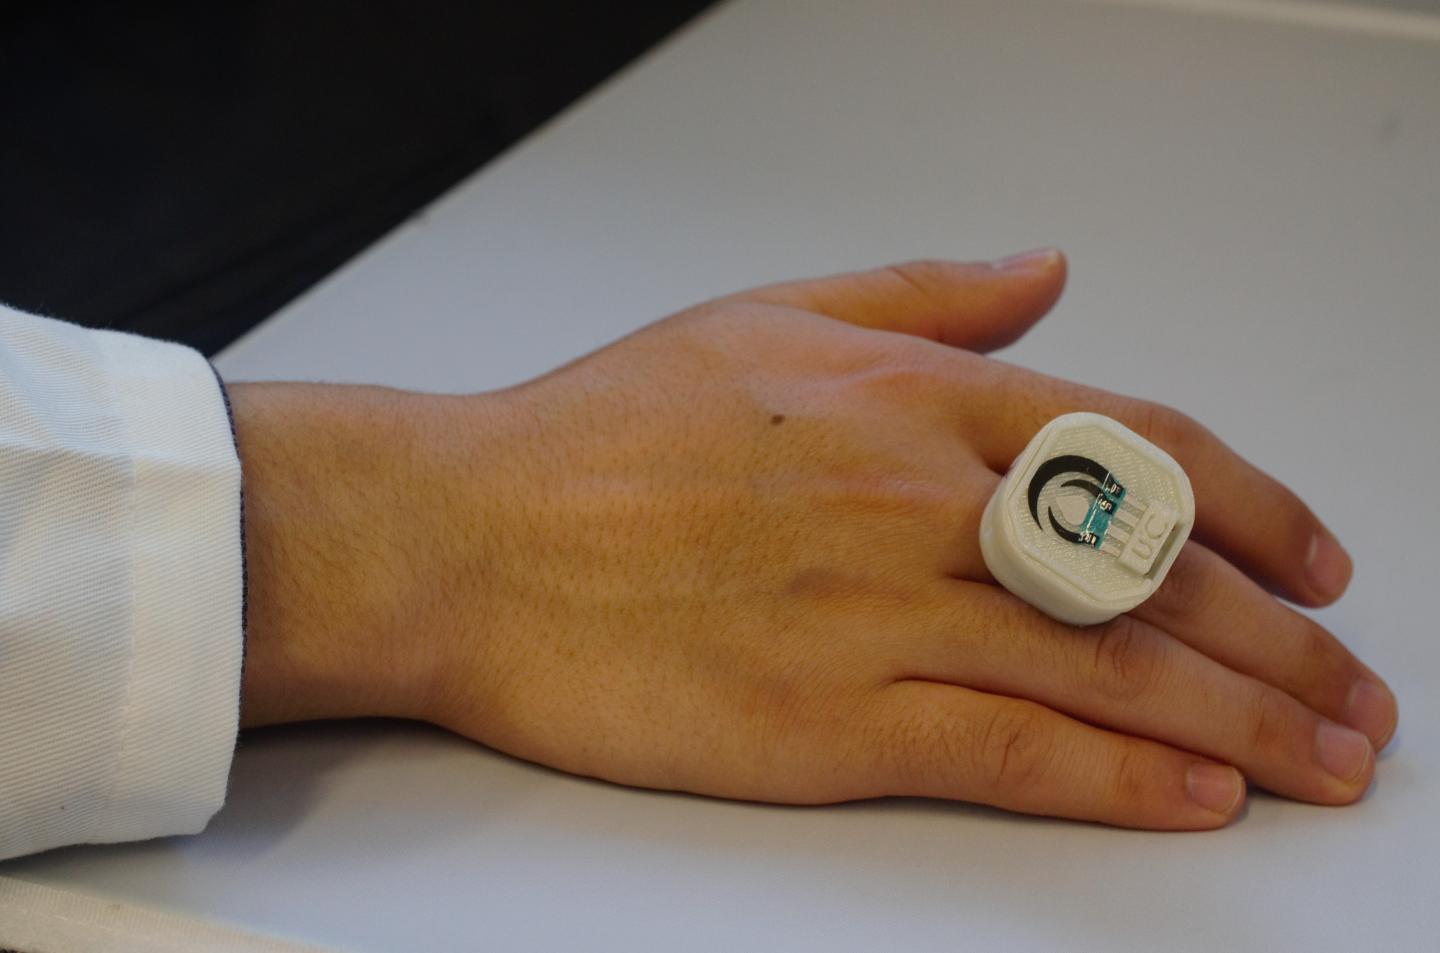 A Fashionable Chemical and Biological Threat Detector-On-A-Ring